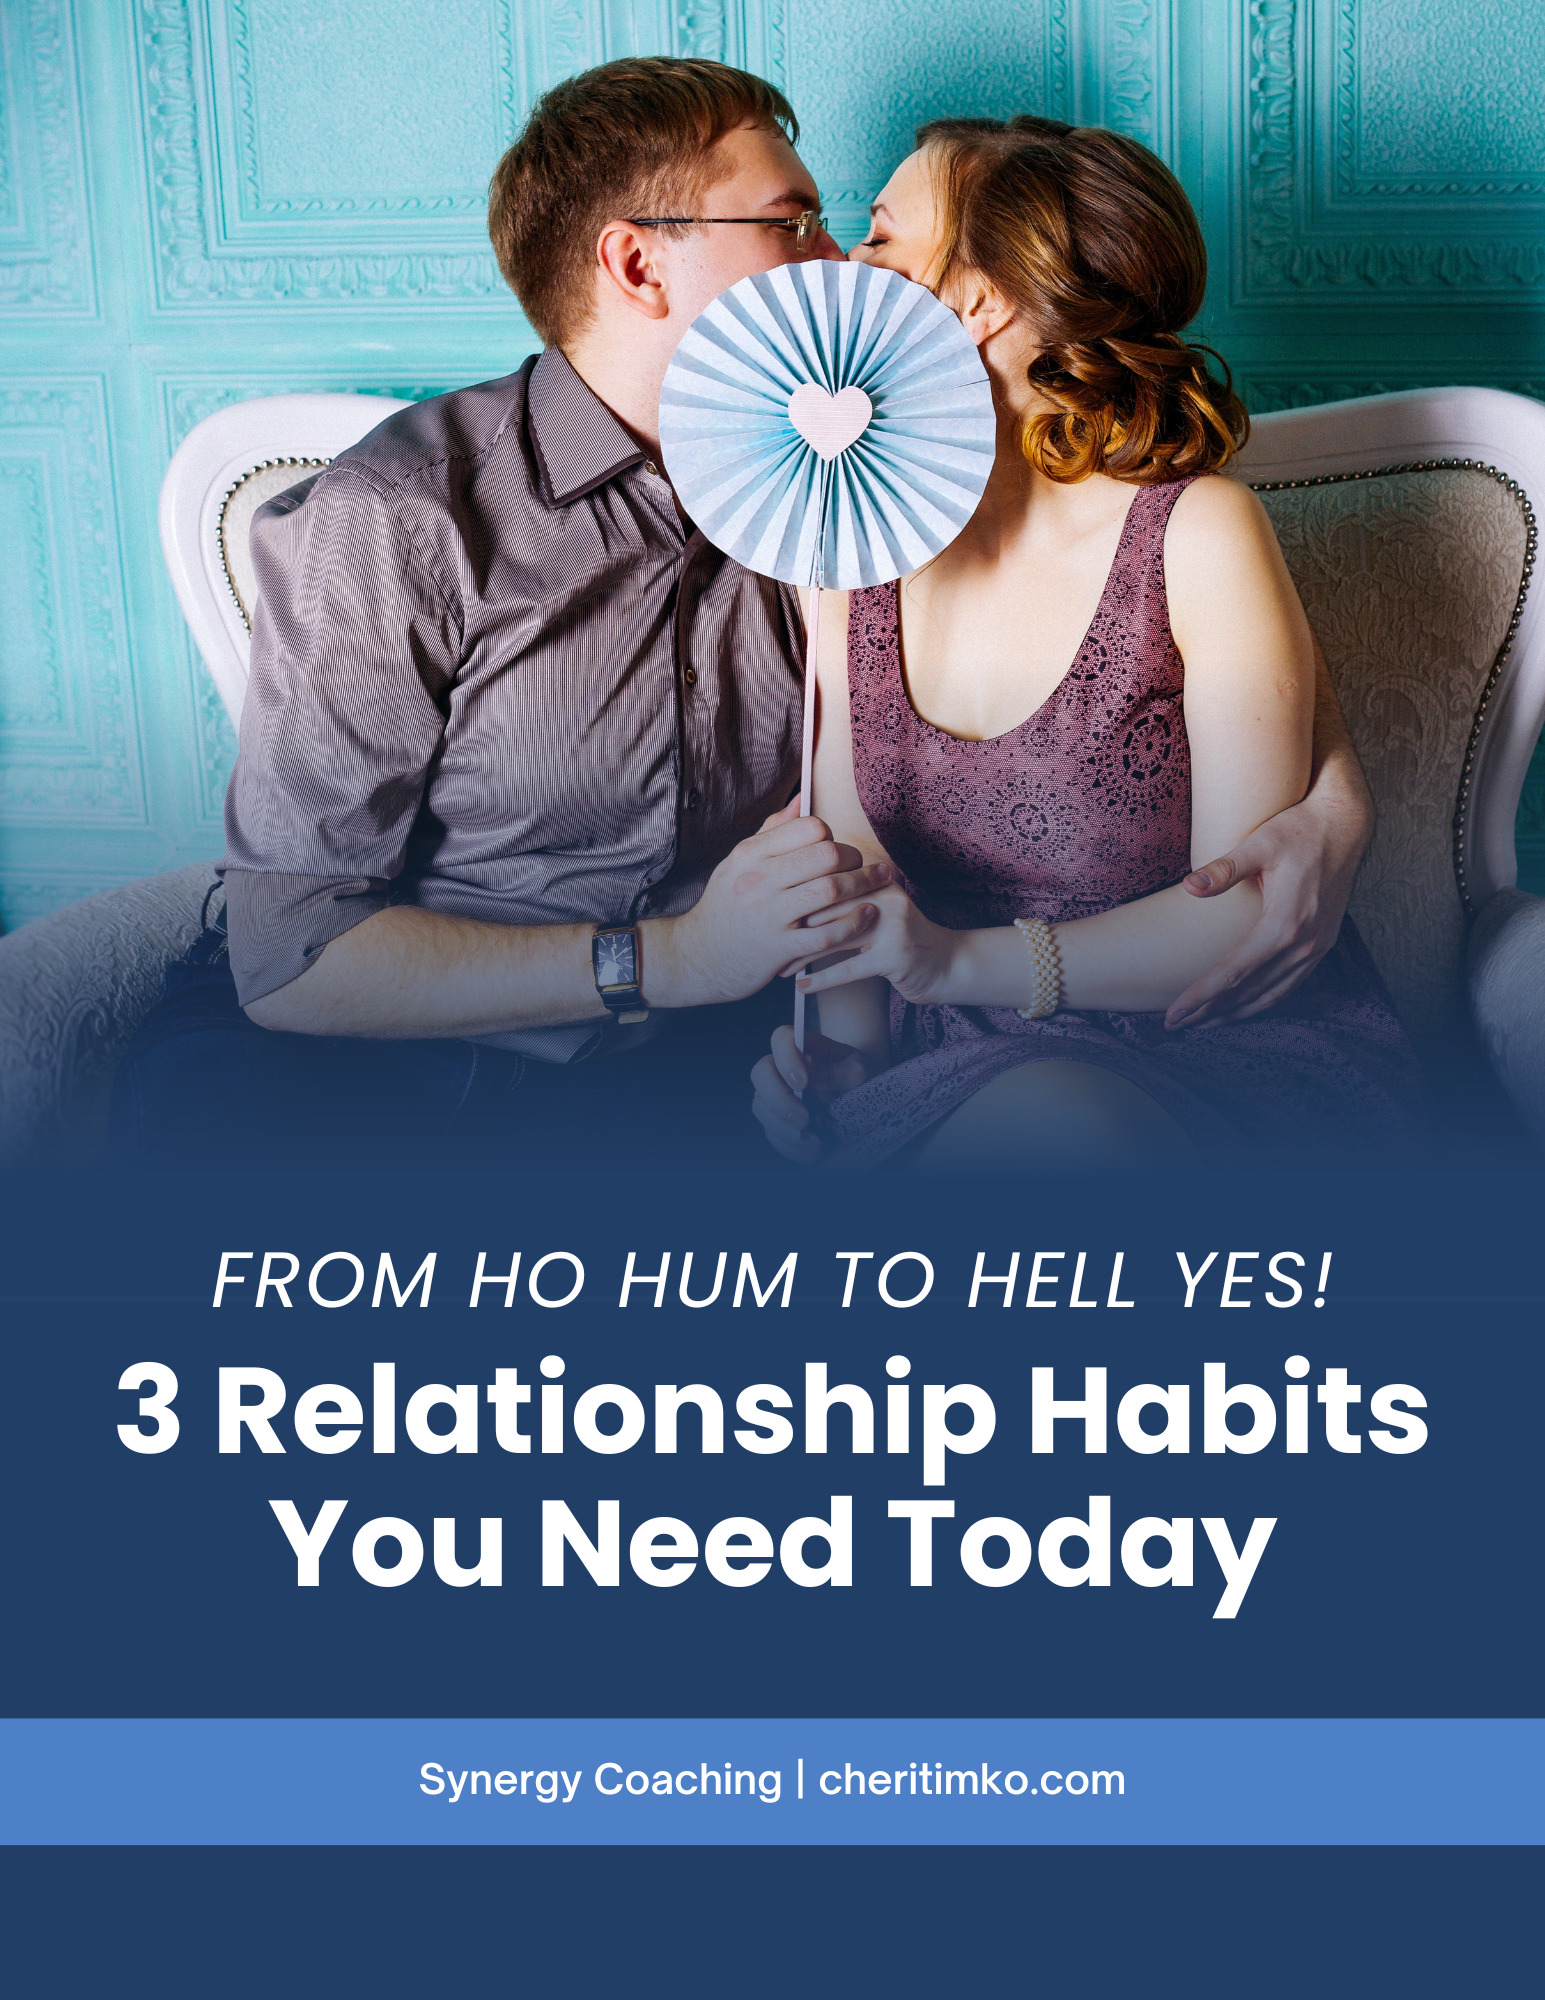 Exciting guide on transforming relationships with Cheri Timko - "Ho Hum To Hell Yes: 3 Relationship Habits You Need Today!"